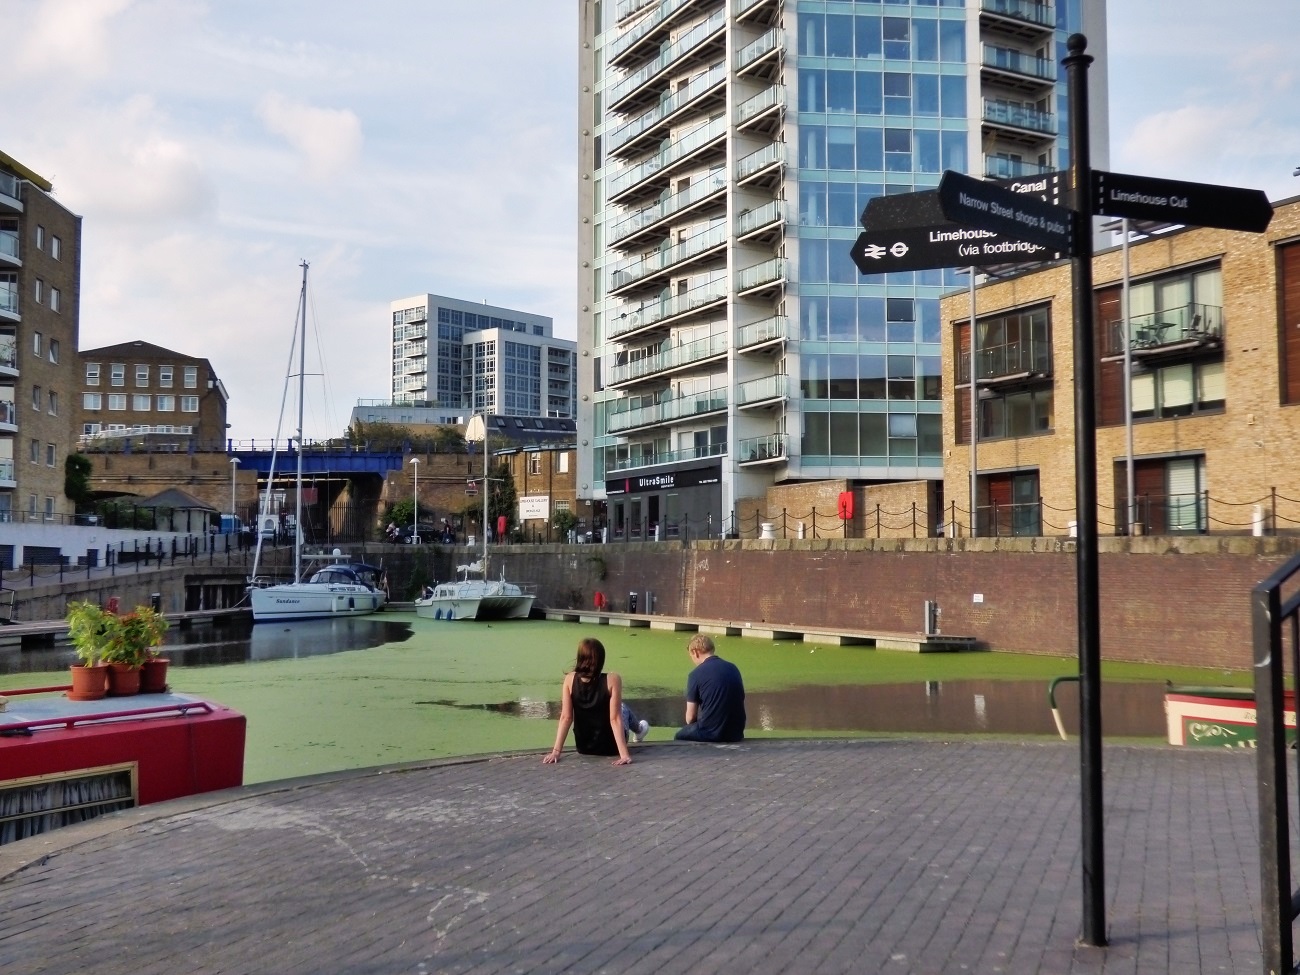 20160816_Tower-Hamlets_Limehouse-Basin_Perfect-place-for-a-date